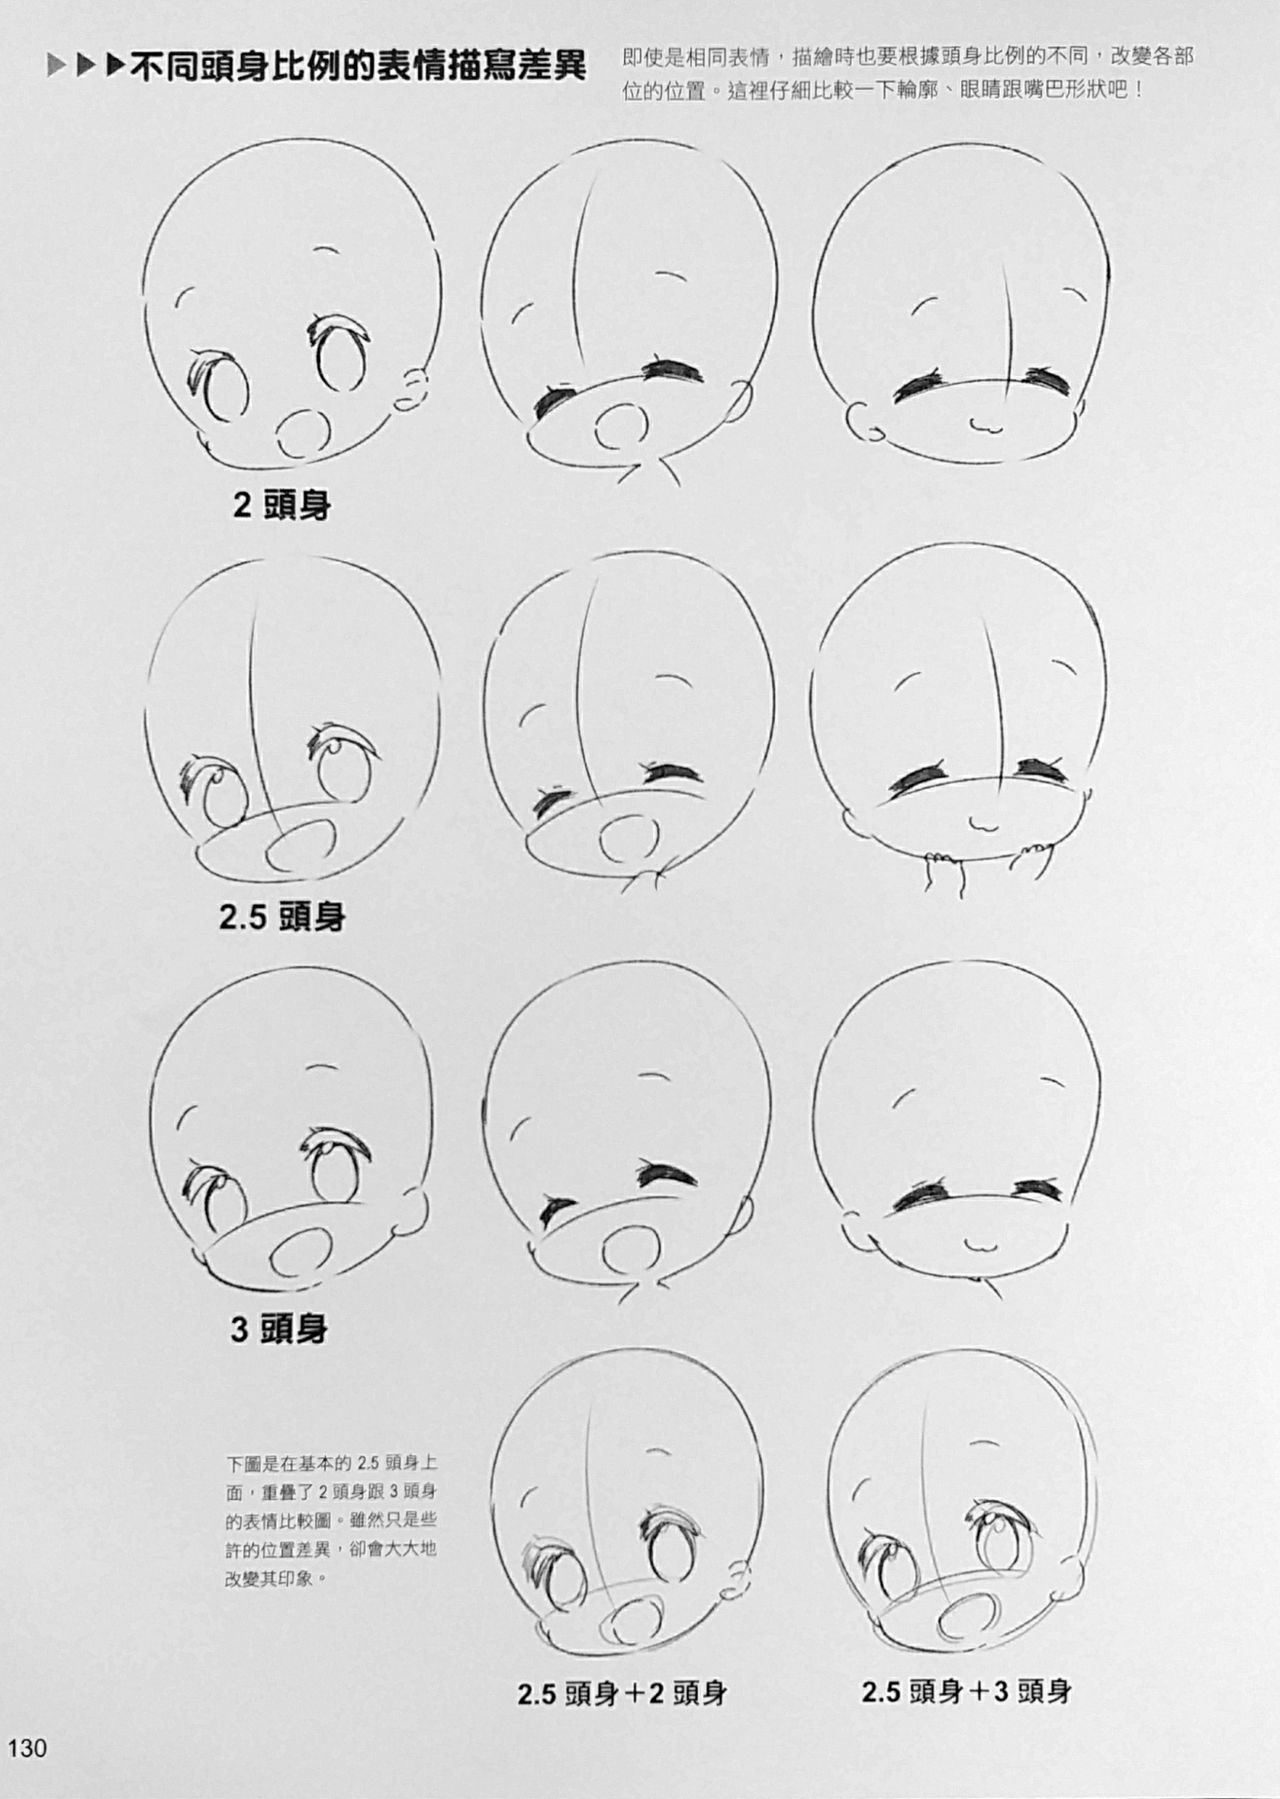 How to draw different mini charater 129